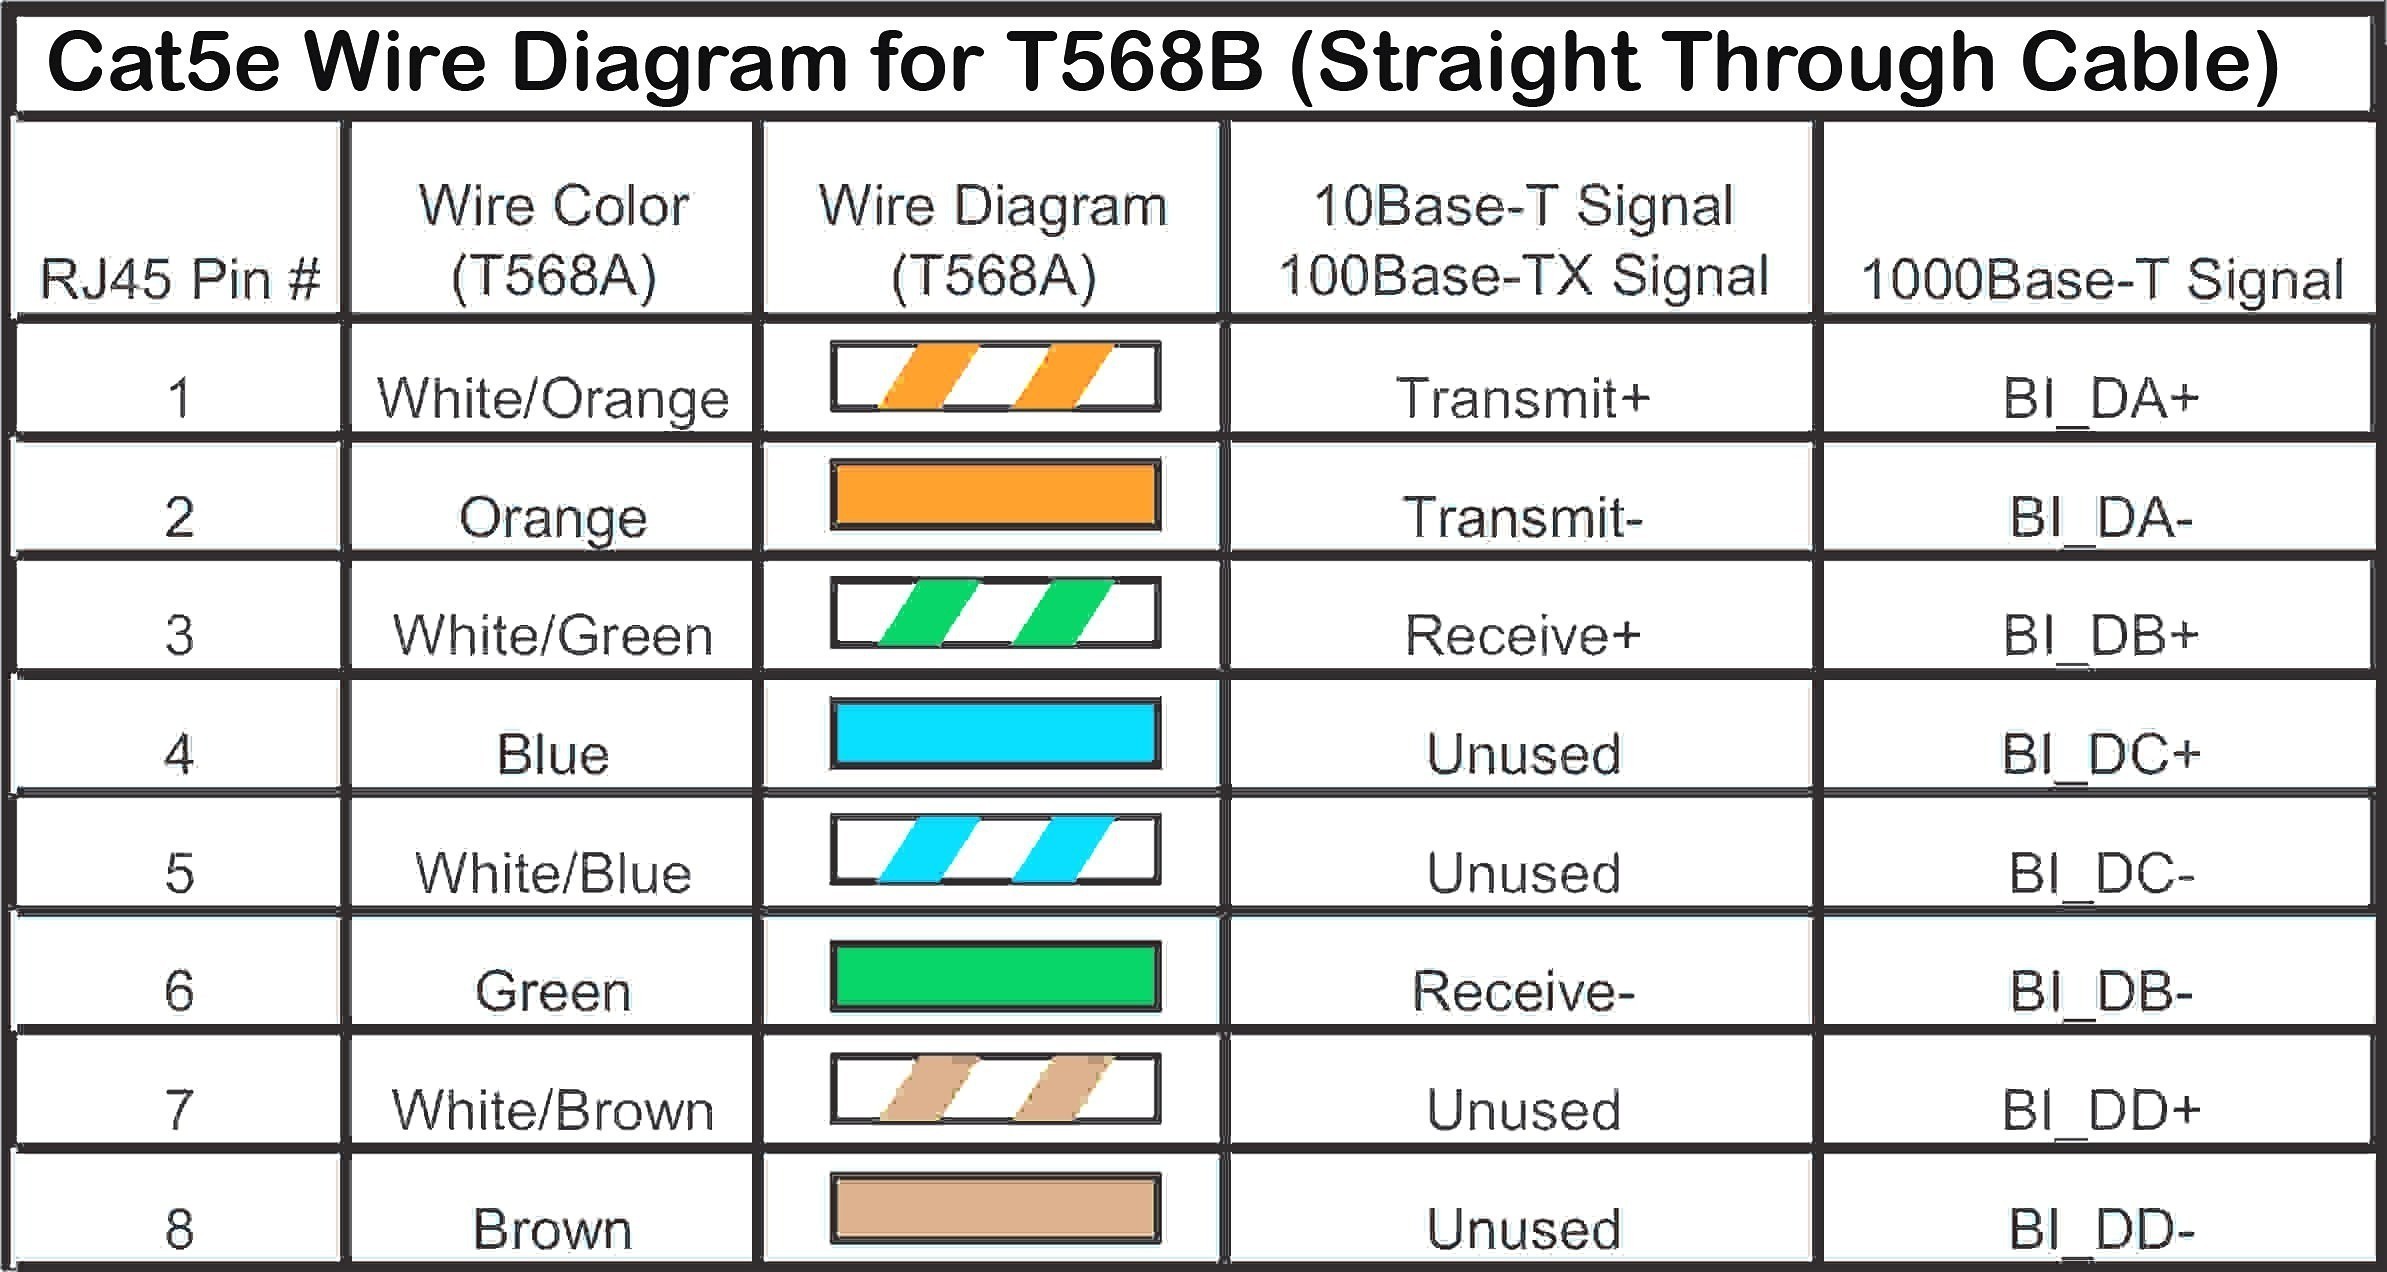 Wiring Diagram for Cat5 Cable Wiring Diagram for A Cat5 Cable New Cat5e Wire Diagram New Ethernet Of Wiring Diagram for Cat5 Cable